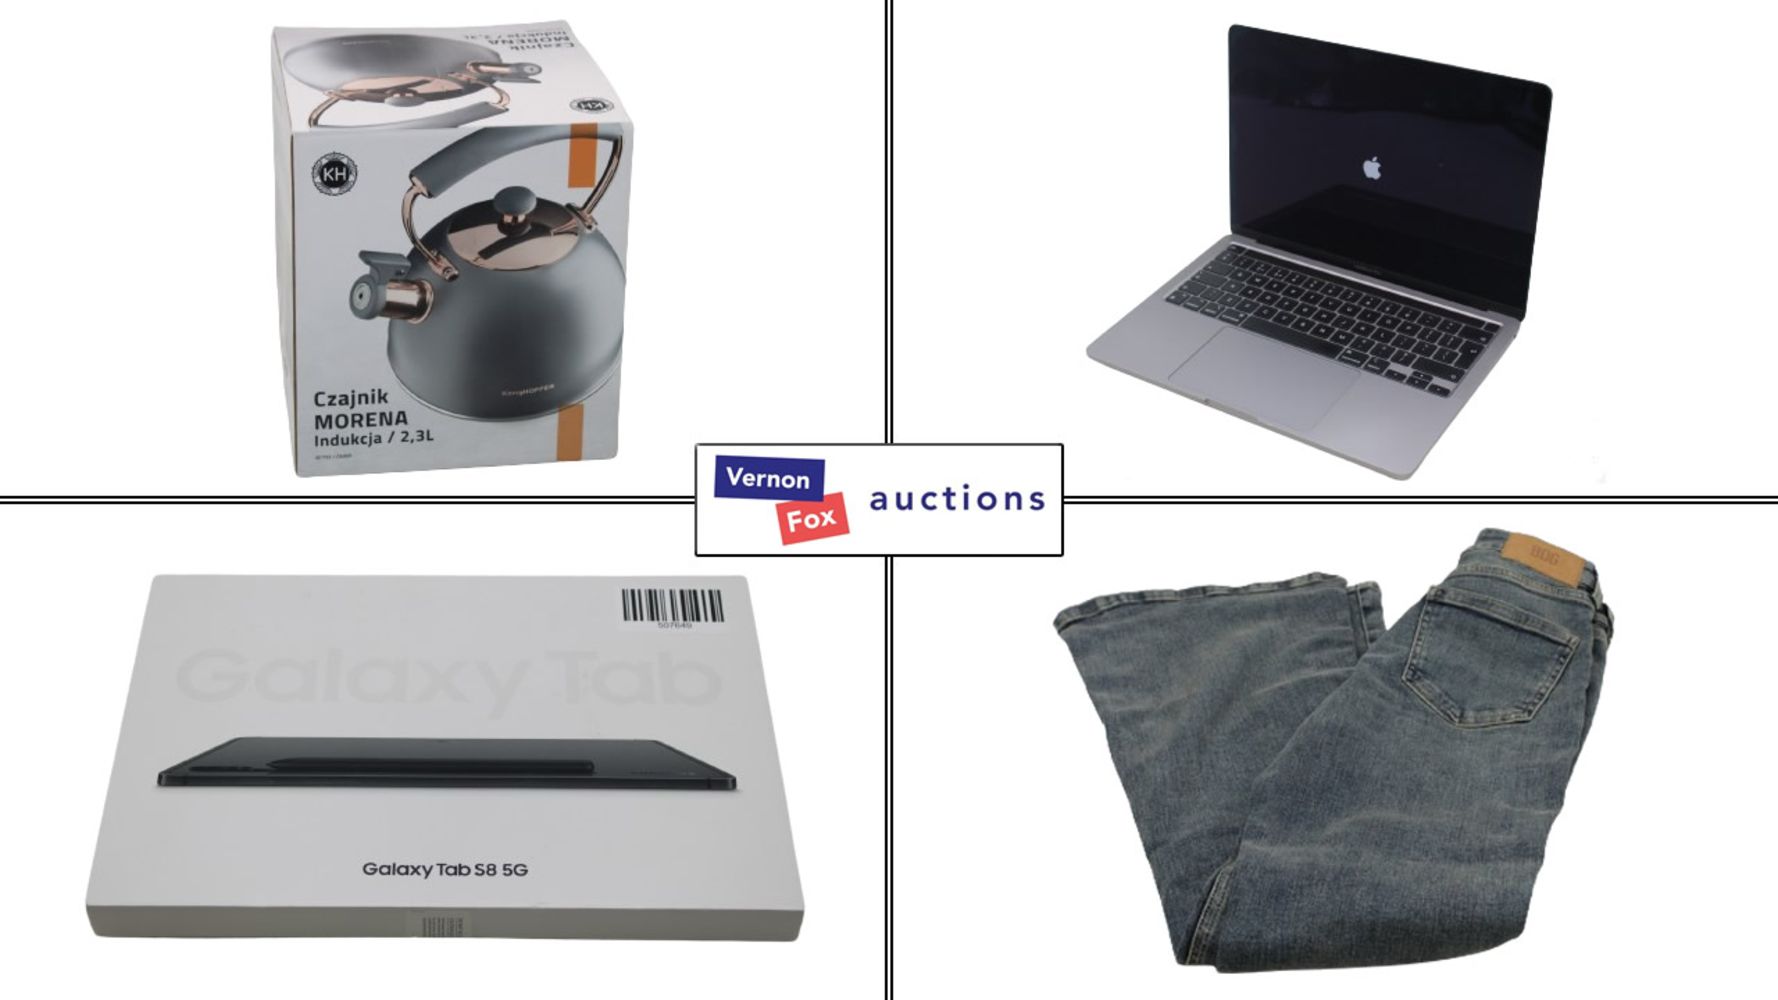 FREE UK DELIVERY: Laptops, Tablets, Phones, Homewares, Clothing, Sports Equipment and many more Commercial and Industrial items